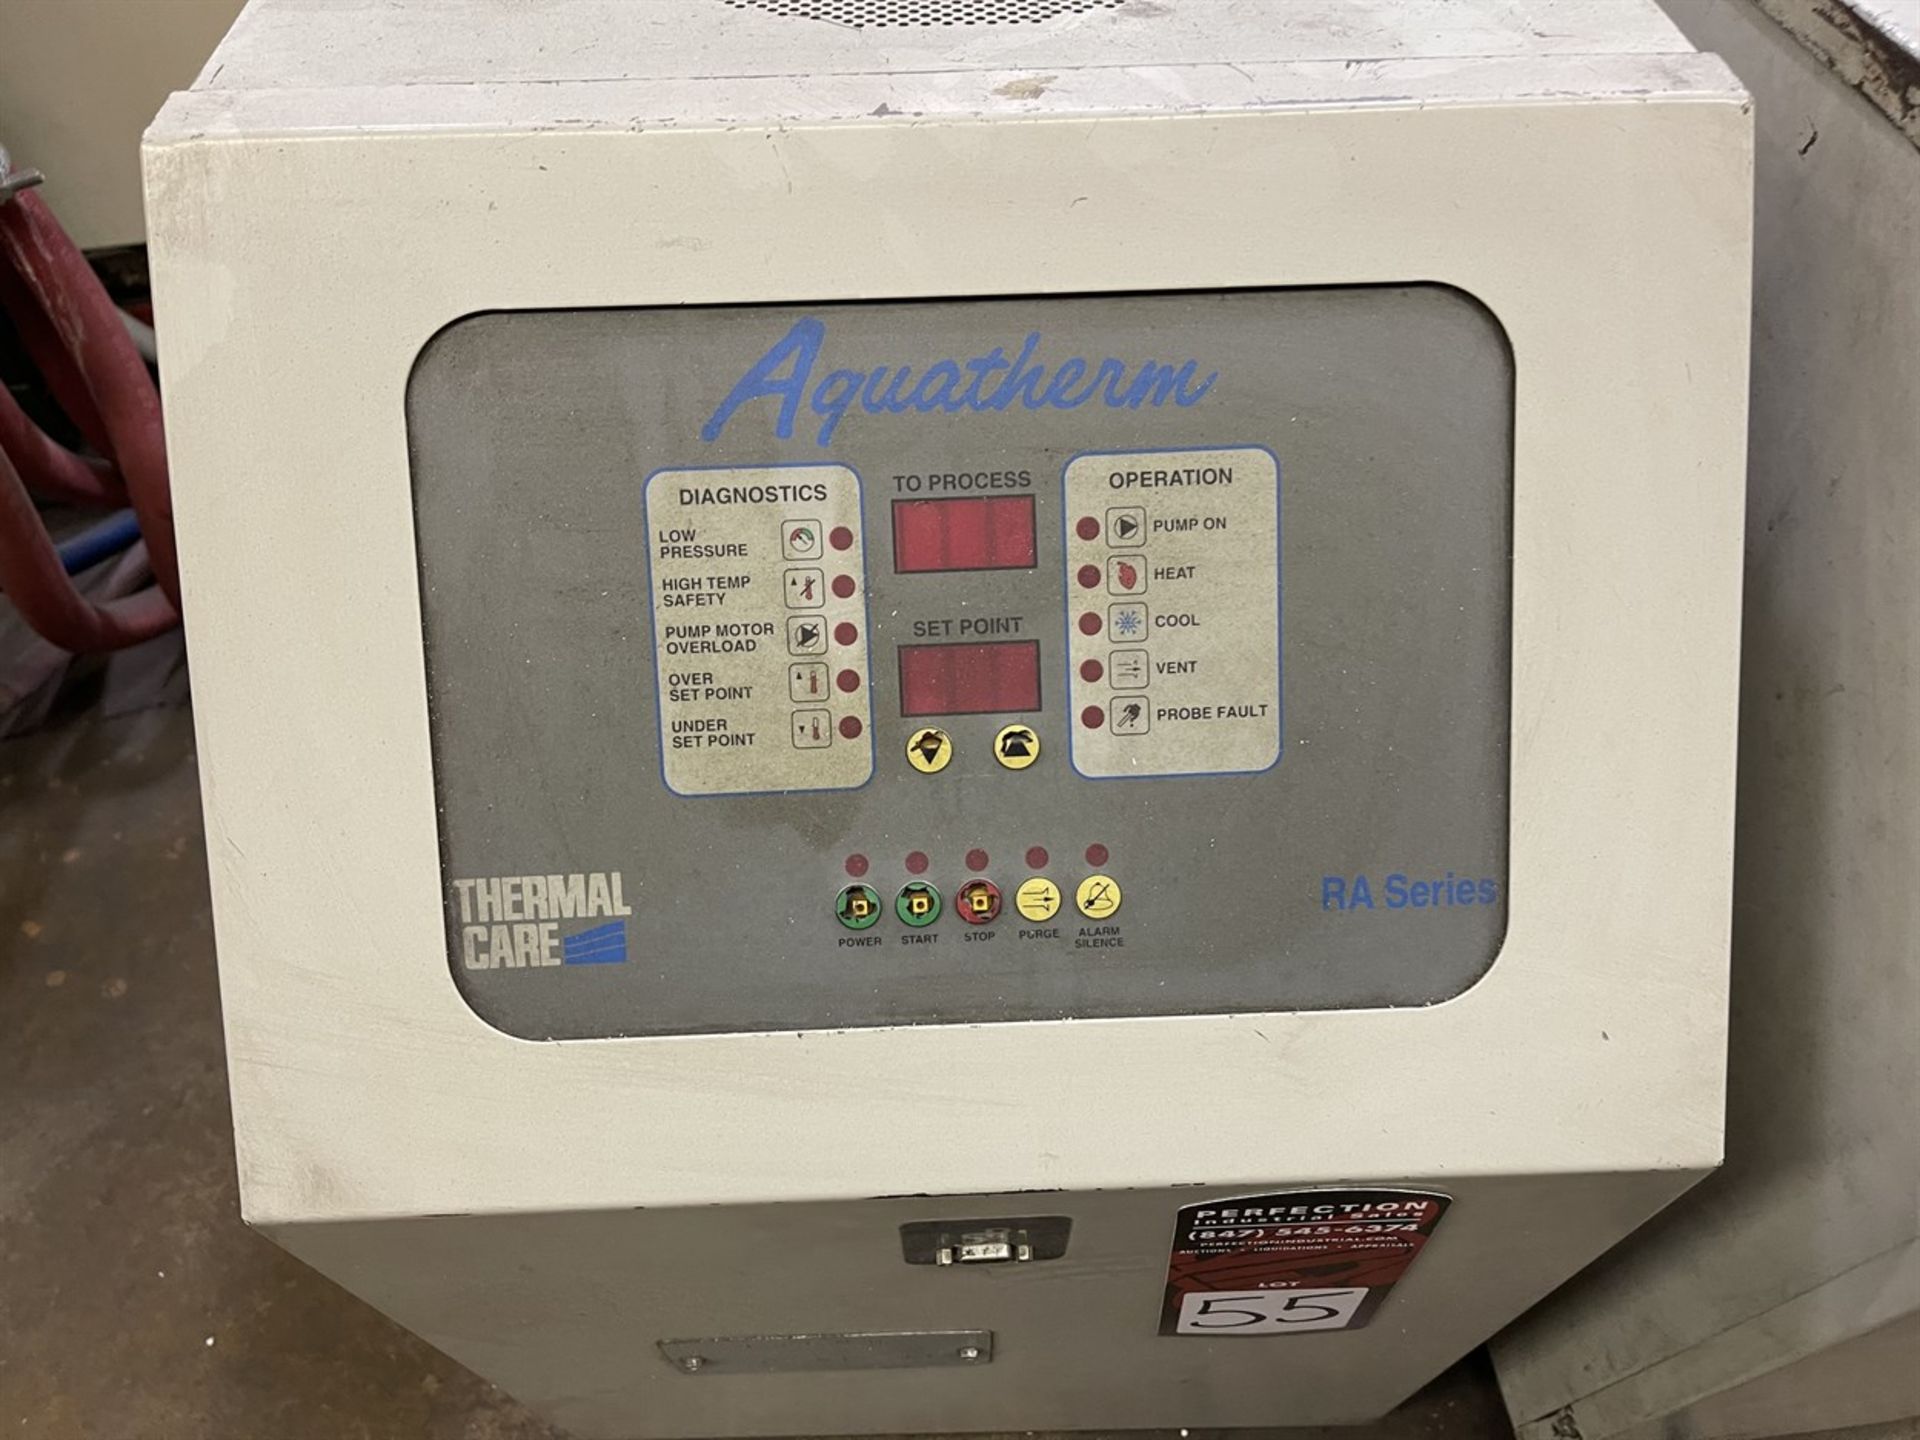 THERMAL CARE Aquatherm RA091004 Temperature Controller, s/n 38410029910 - Image 2 of 3